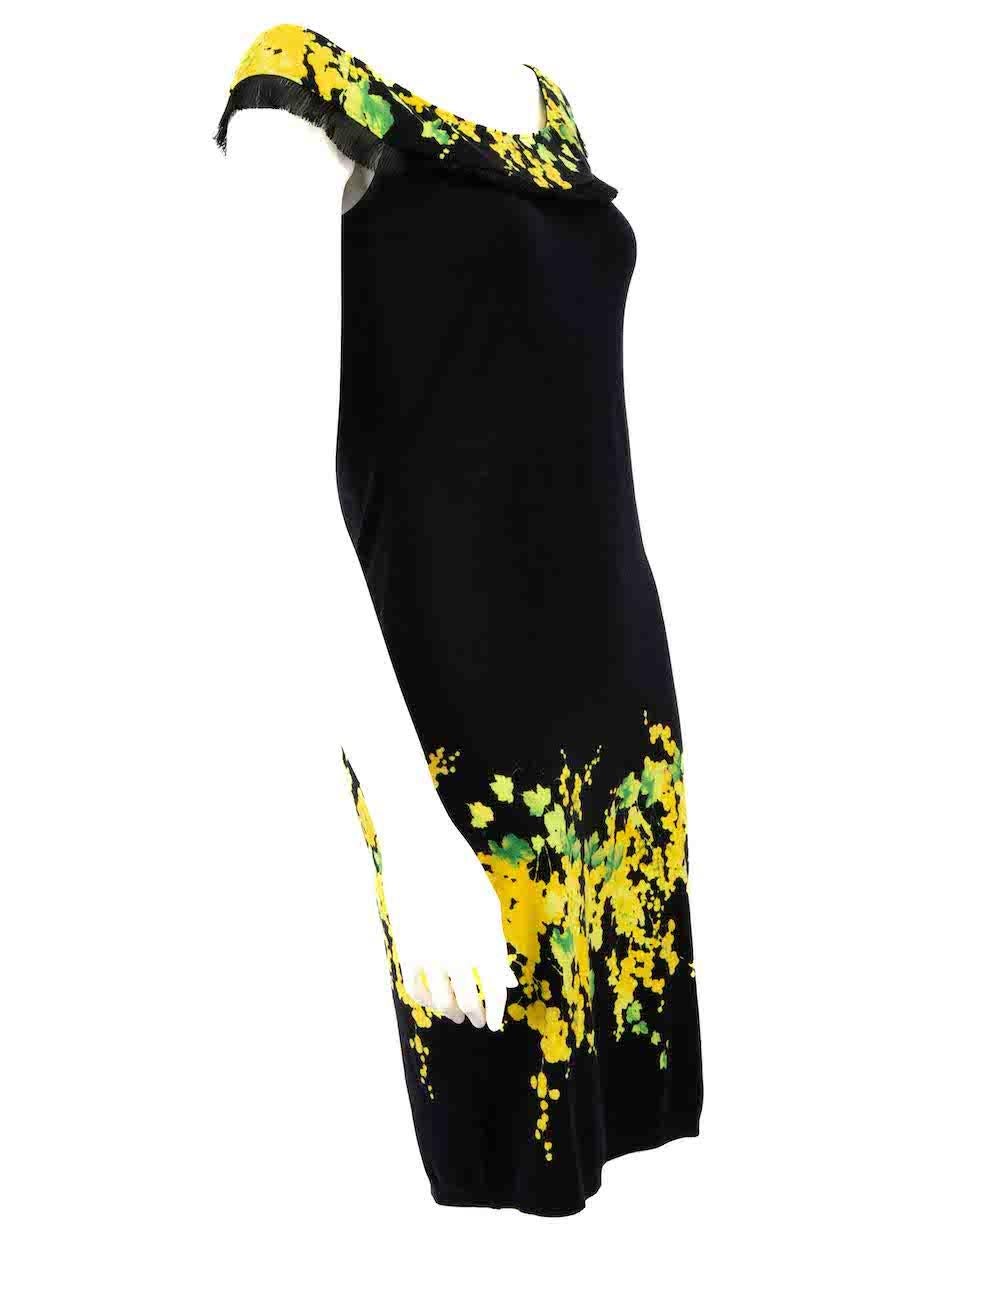 CONDITION is Very good. Hardly any visible wear to dress is evident on this used Blumarine designer resale item.
 
 Details
 Black
 Polyester
 Dress
 Floral pattern
 Knee length
 Sleeveless
 Round neck
 Fringe detail
 
 
 Made in Italy
 
